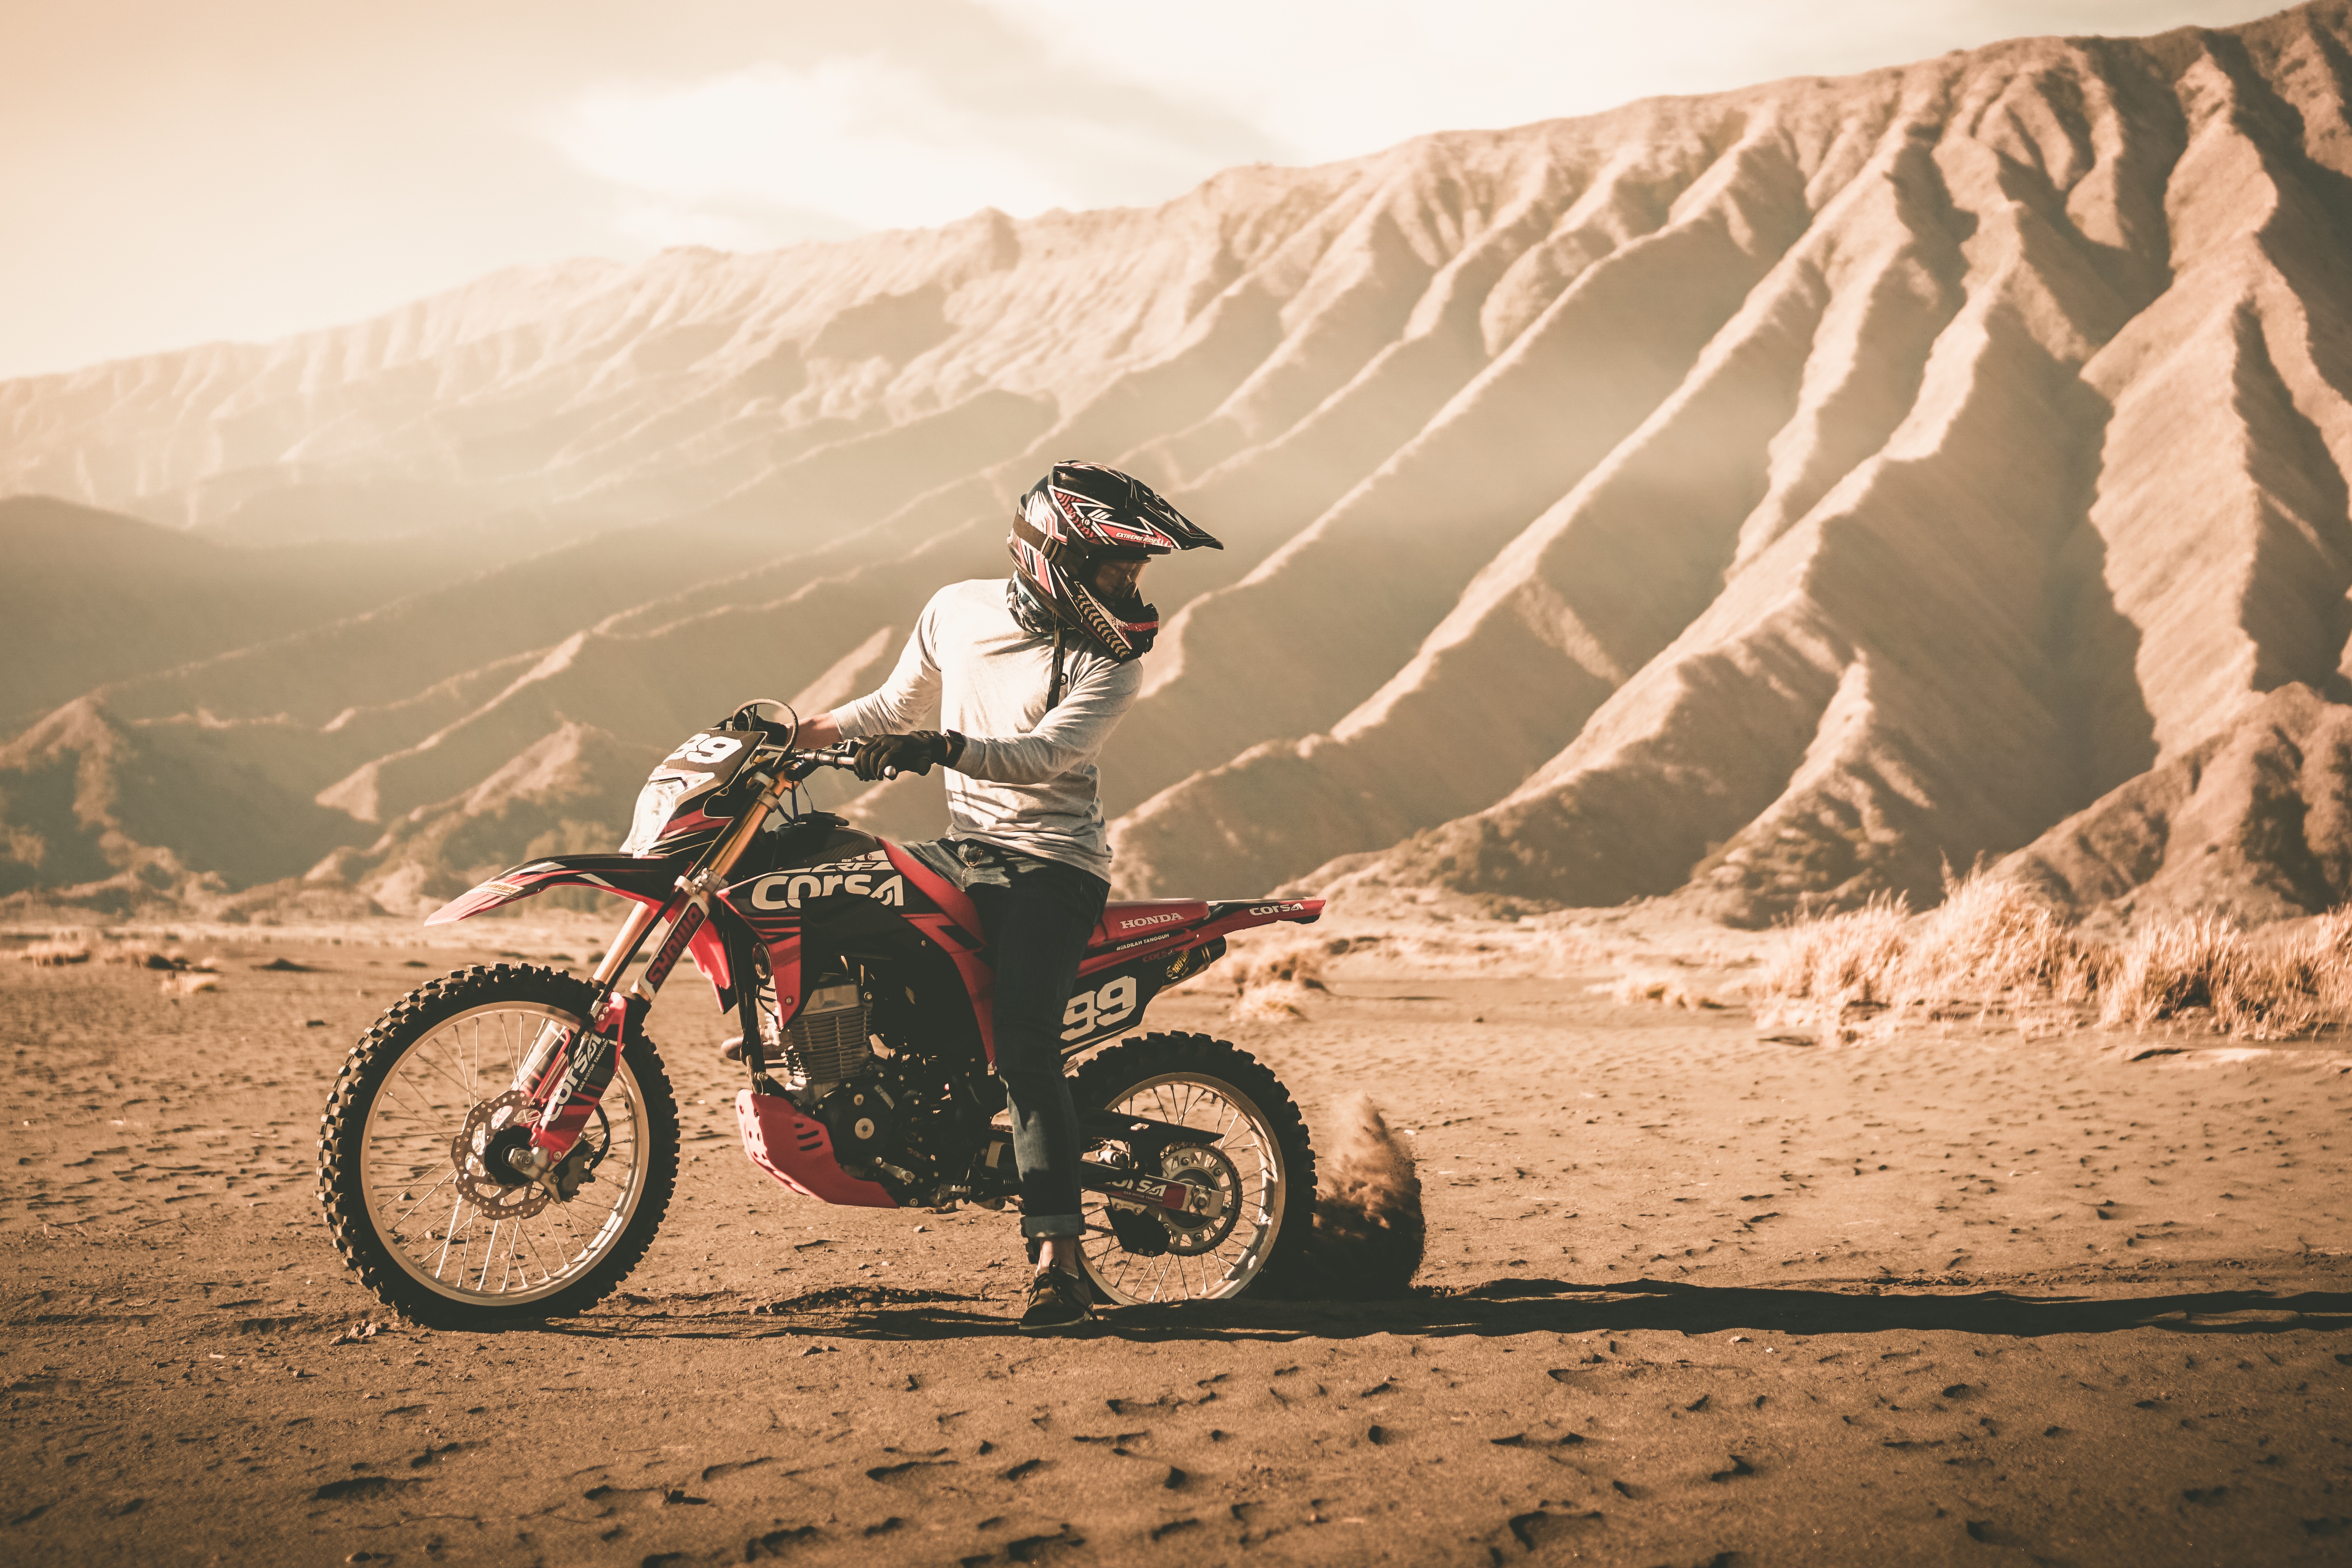 motorcyclist, cross, mountains, sand, motorcycles, helmet, motorcycle, off road, impassability